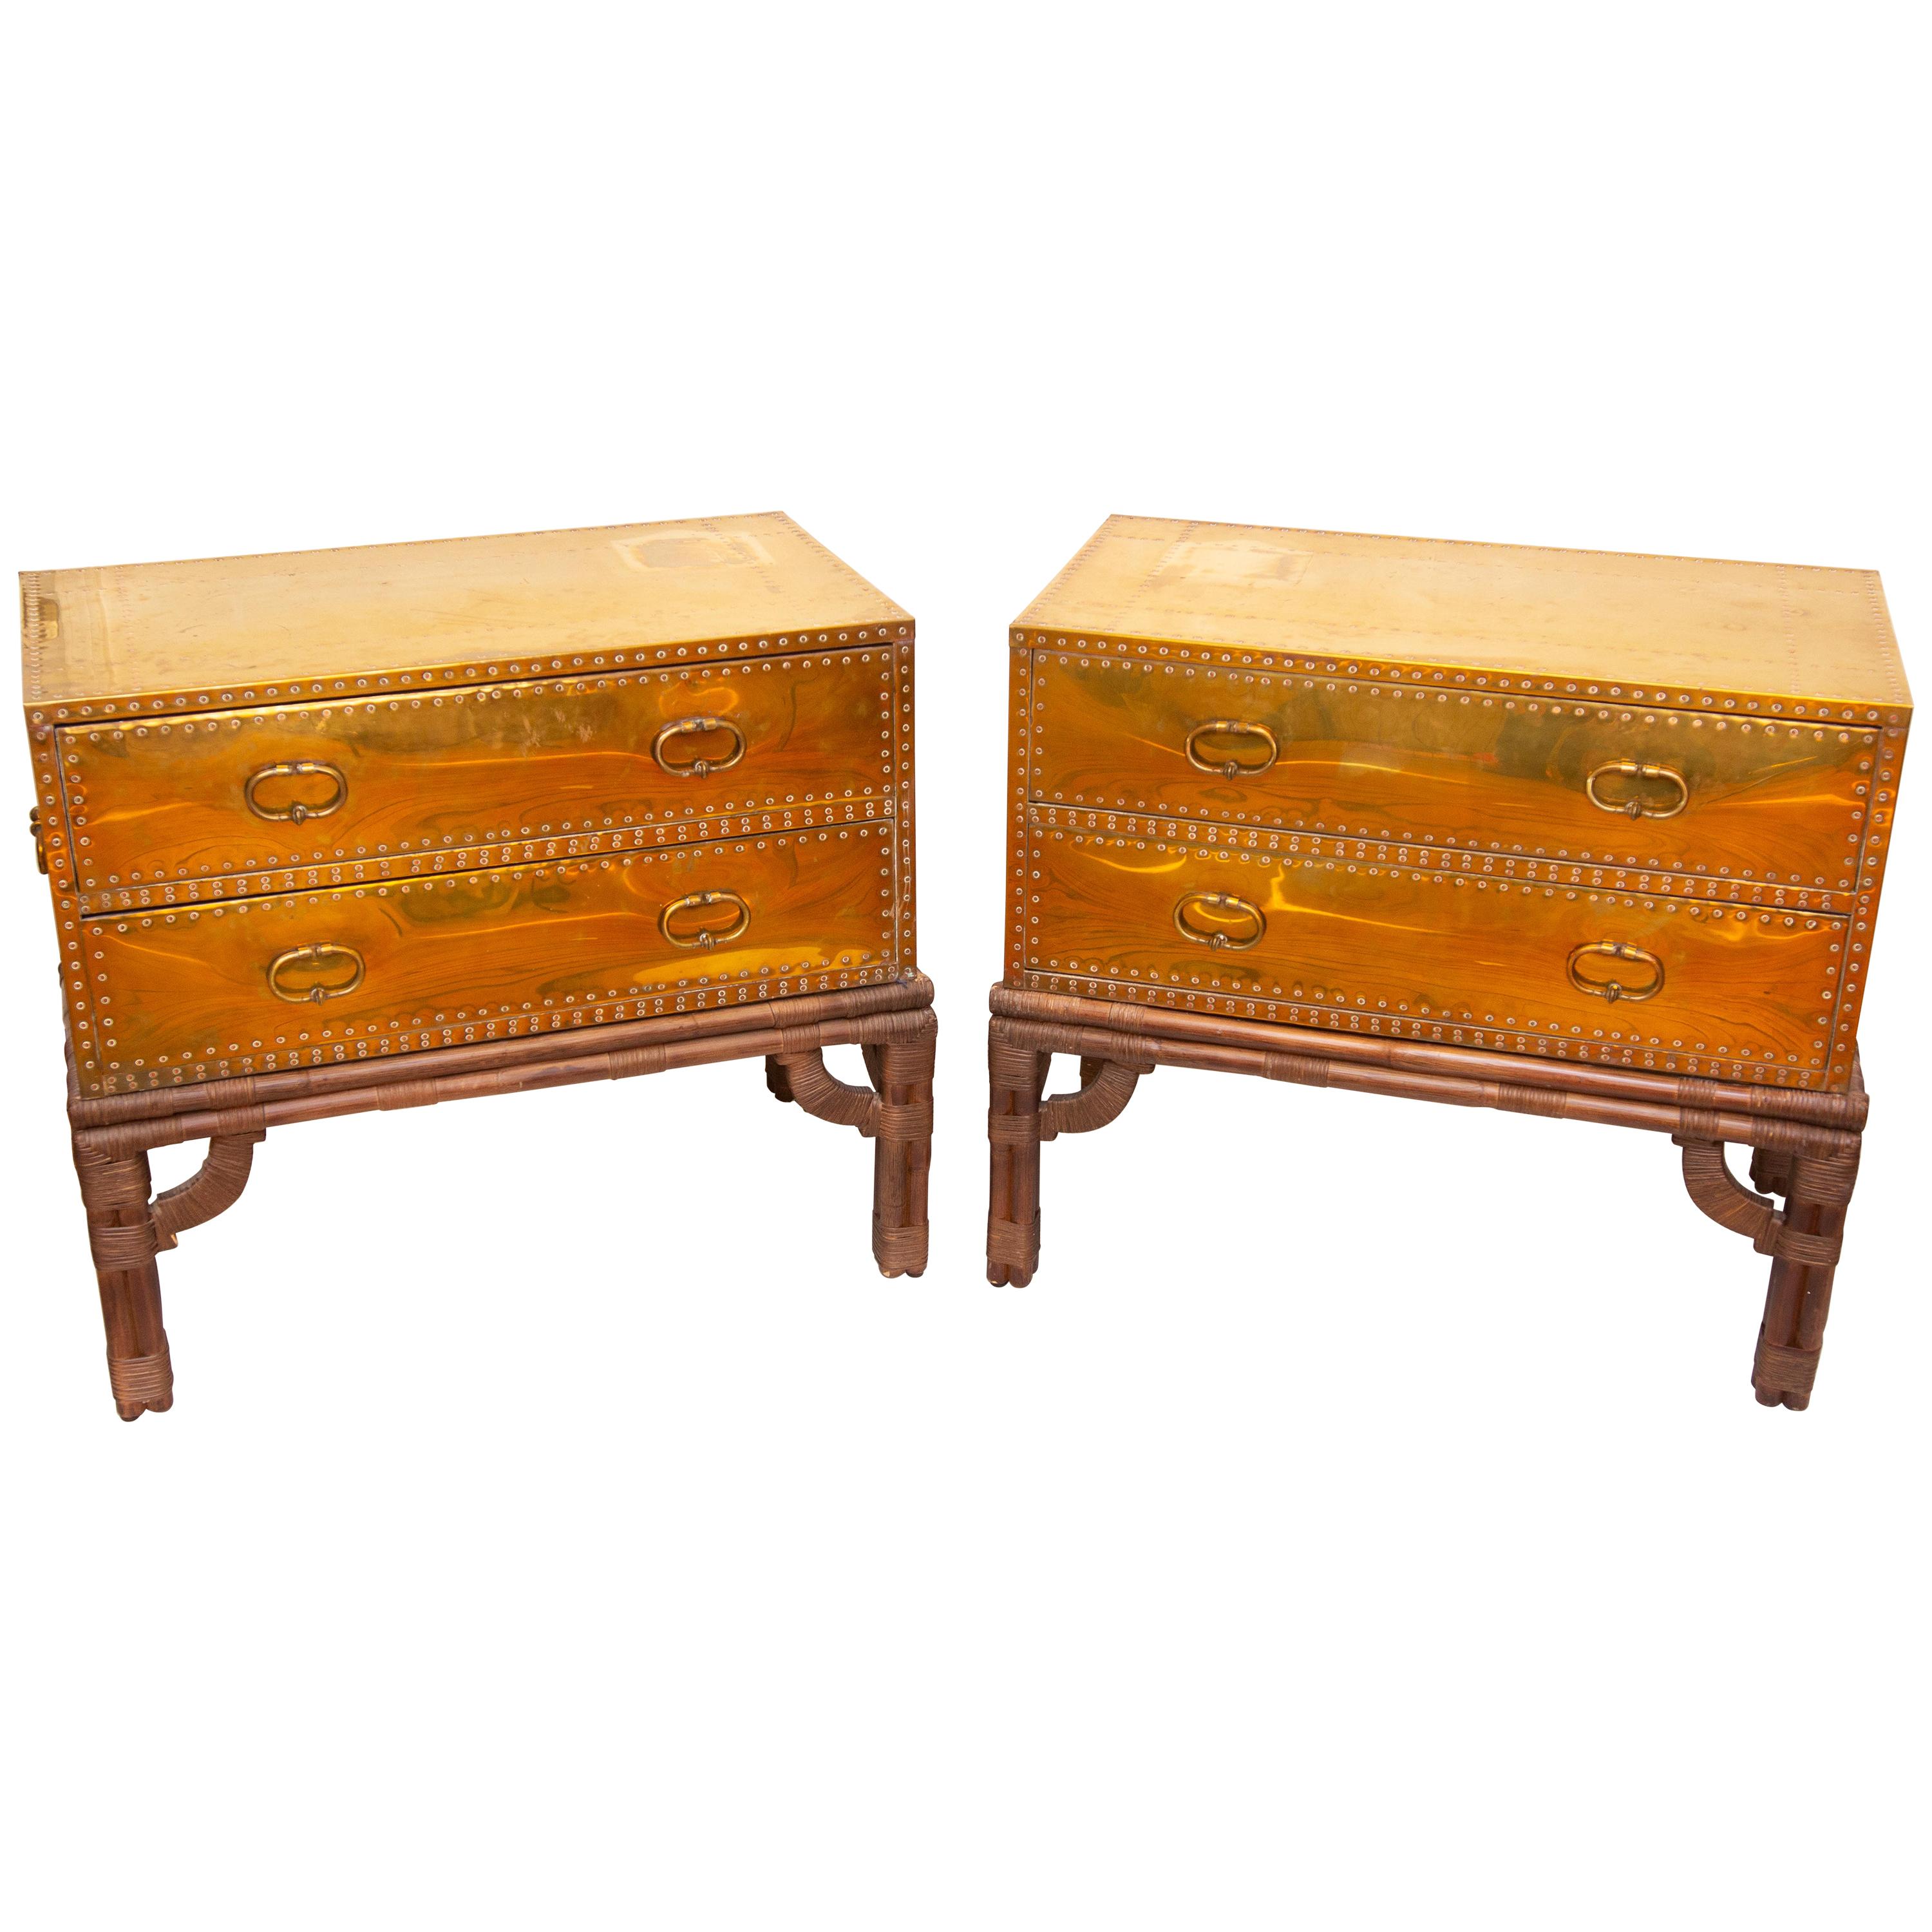 Pair of Campaign style two-drawer chests on the original rattan stands. Heavy riveted brass over wood. Very well made and sturdy. Backs are also clad. They would work well as commodes, consoles or end tables, circa 1970s by Sarreid Ltd. They also